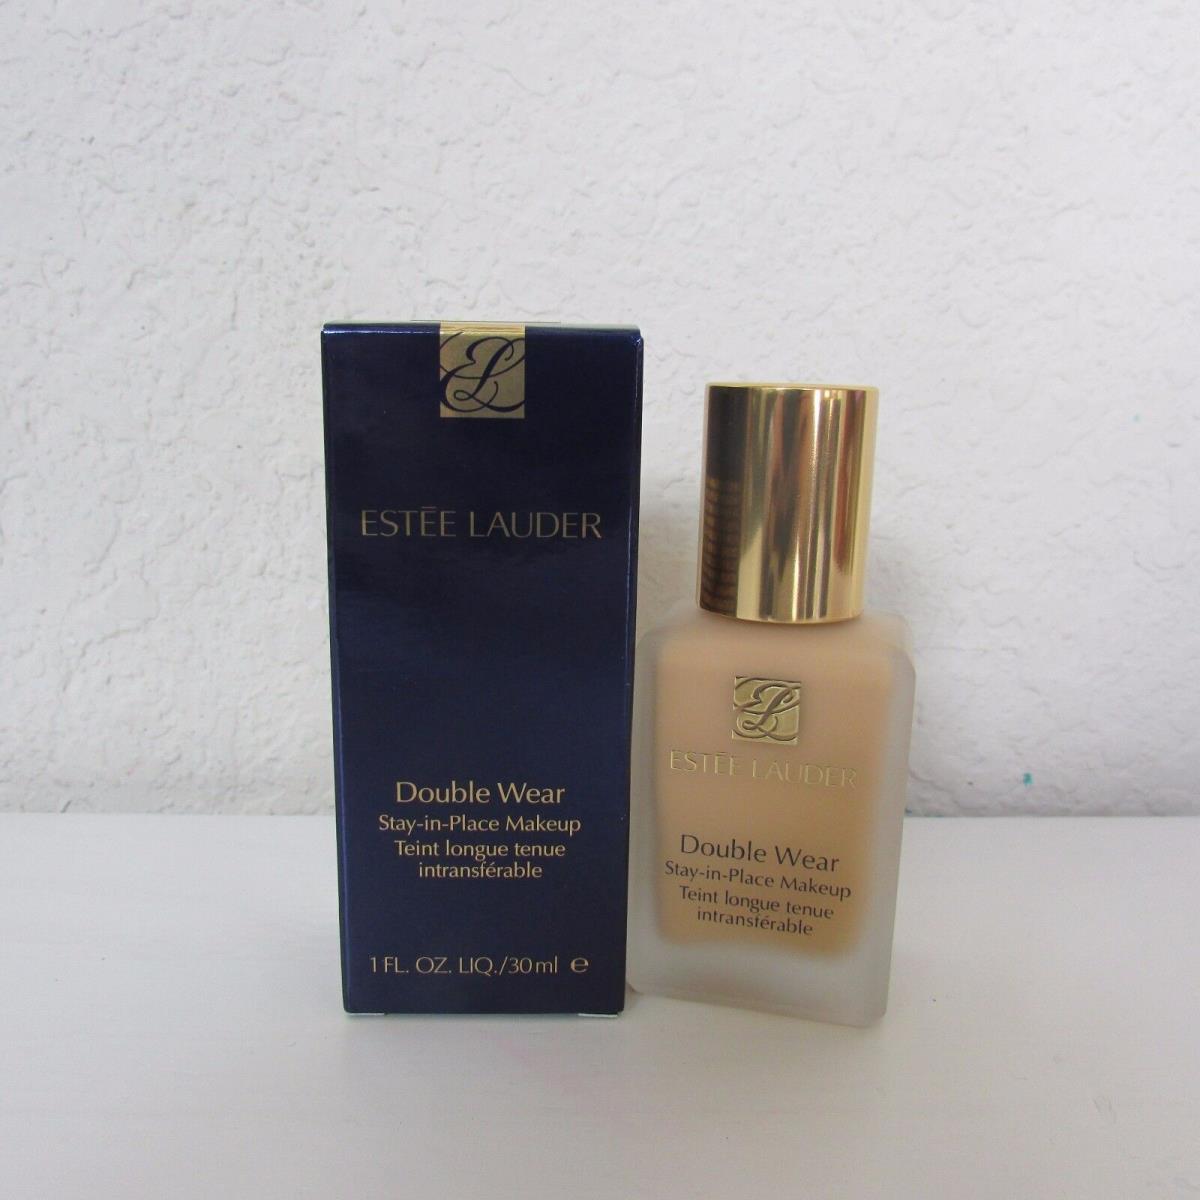 Estee Lauder Double Wear Stay-in-place Makeup Choose Your Shade 1.0 Oz/30 ml 2W2 Rattan